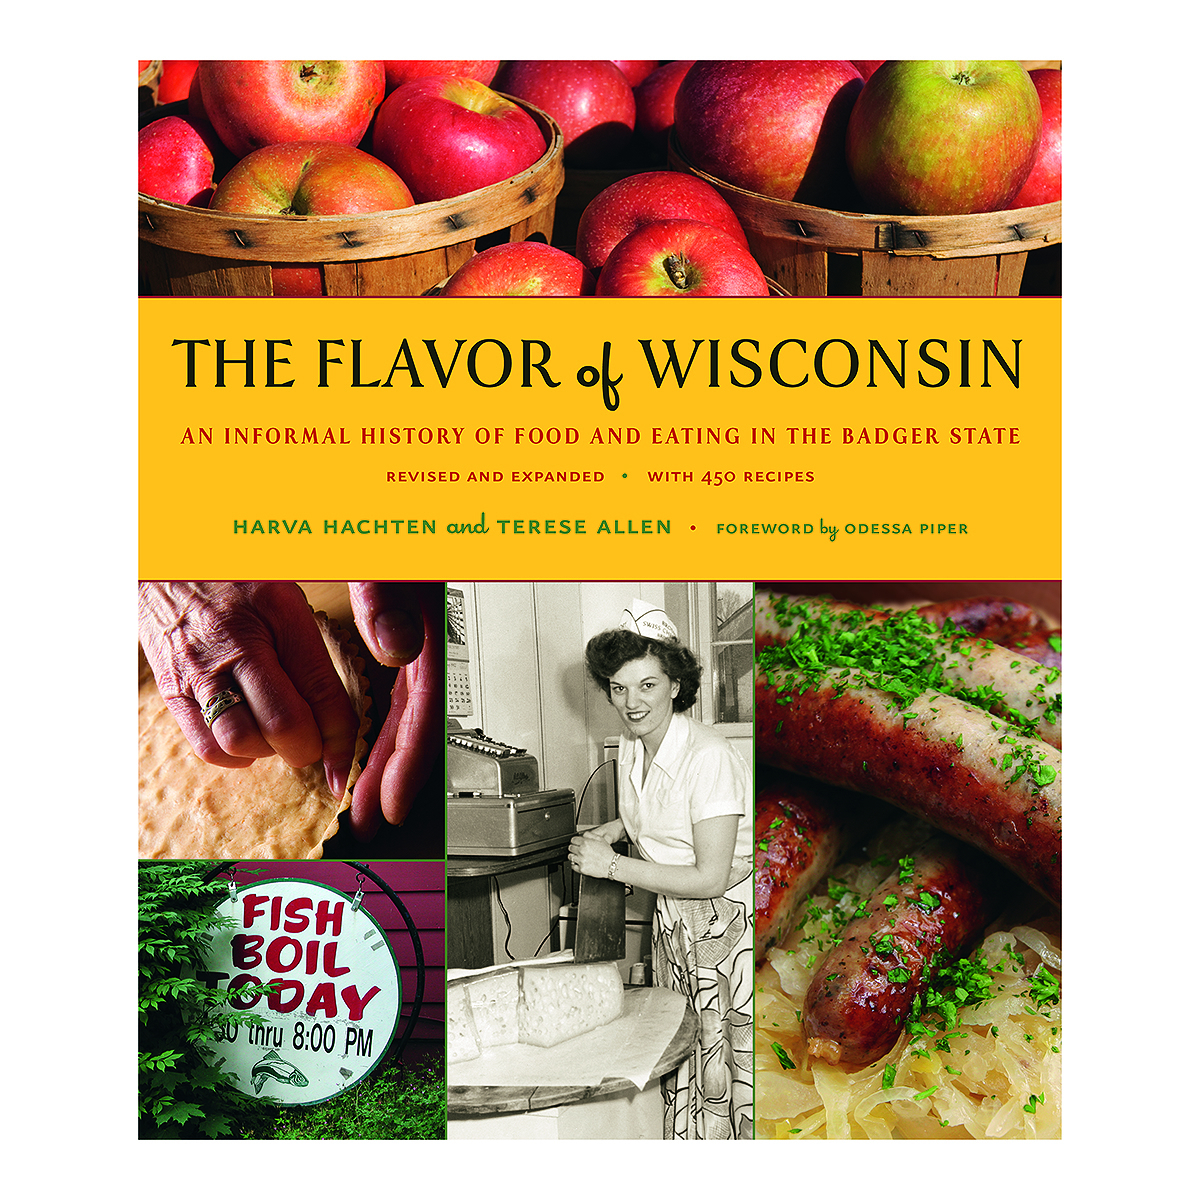 Book cover art. Photos of apples, pie, brats, a woman in a kitchen, an ad for "fish boil today". The Flavor of Wisconsin: An Informal History of Food and Eating in the Badger State. Revised and expanded with 450 recipes. Harva Hachten and Terese Allen. Forward by Odessa Piper.